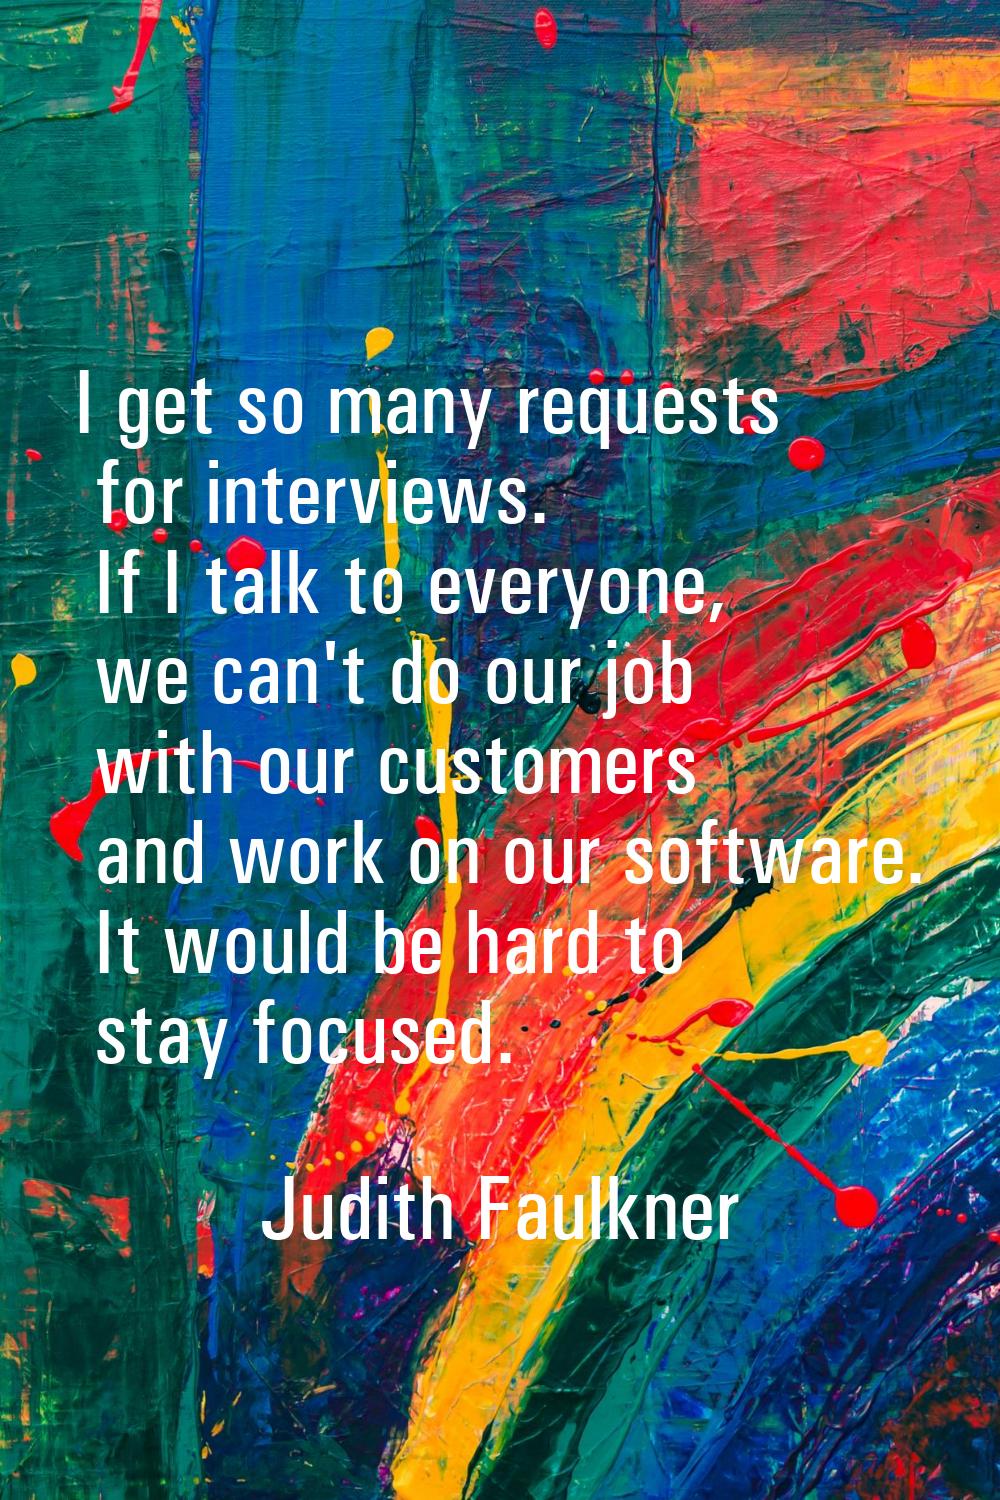 I get so many requests for interviews. If I talk to everyone, we can't do our job with our customer